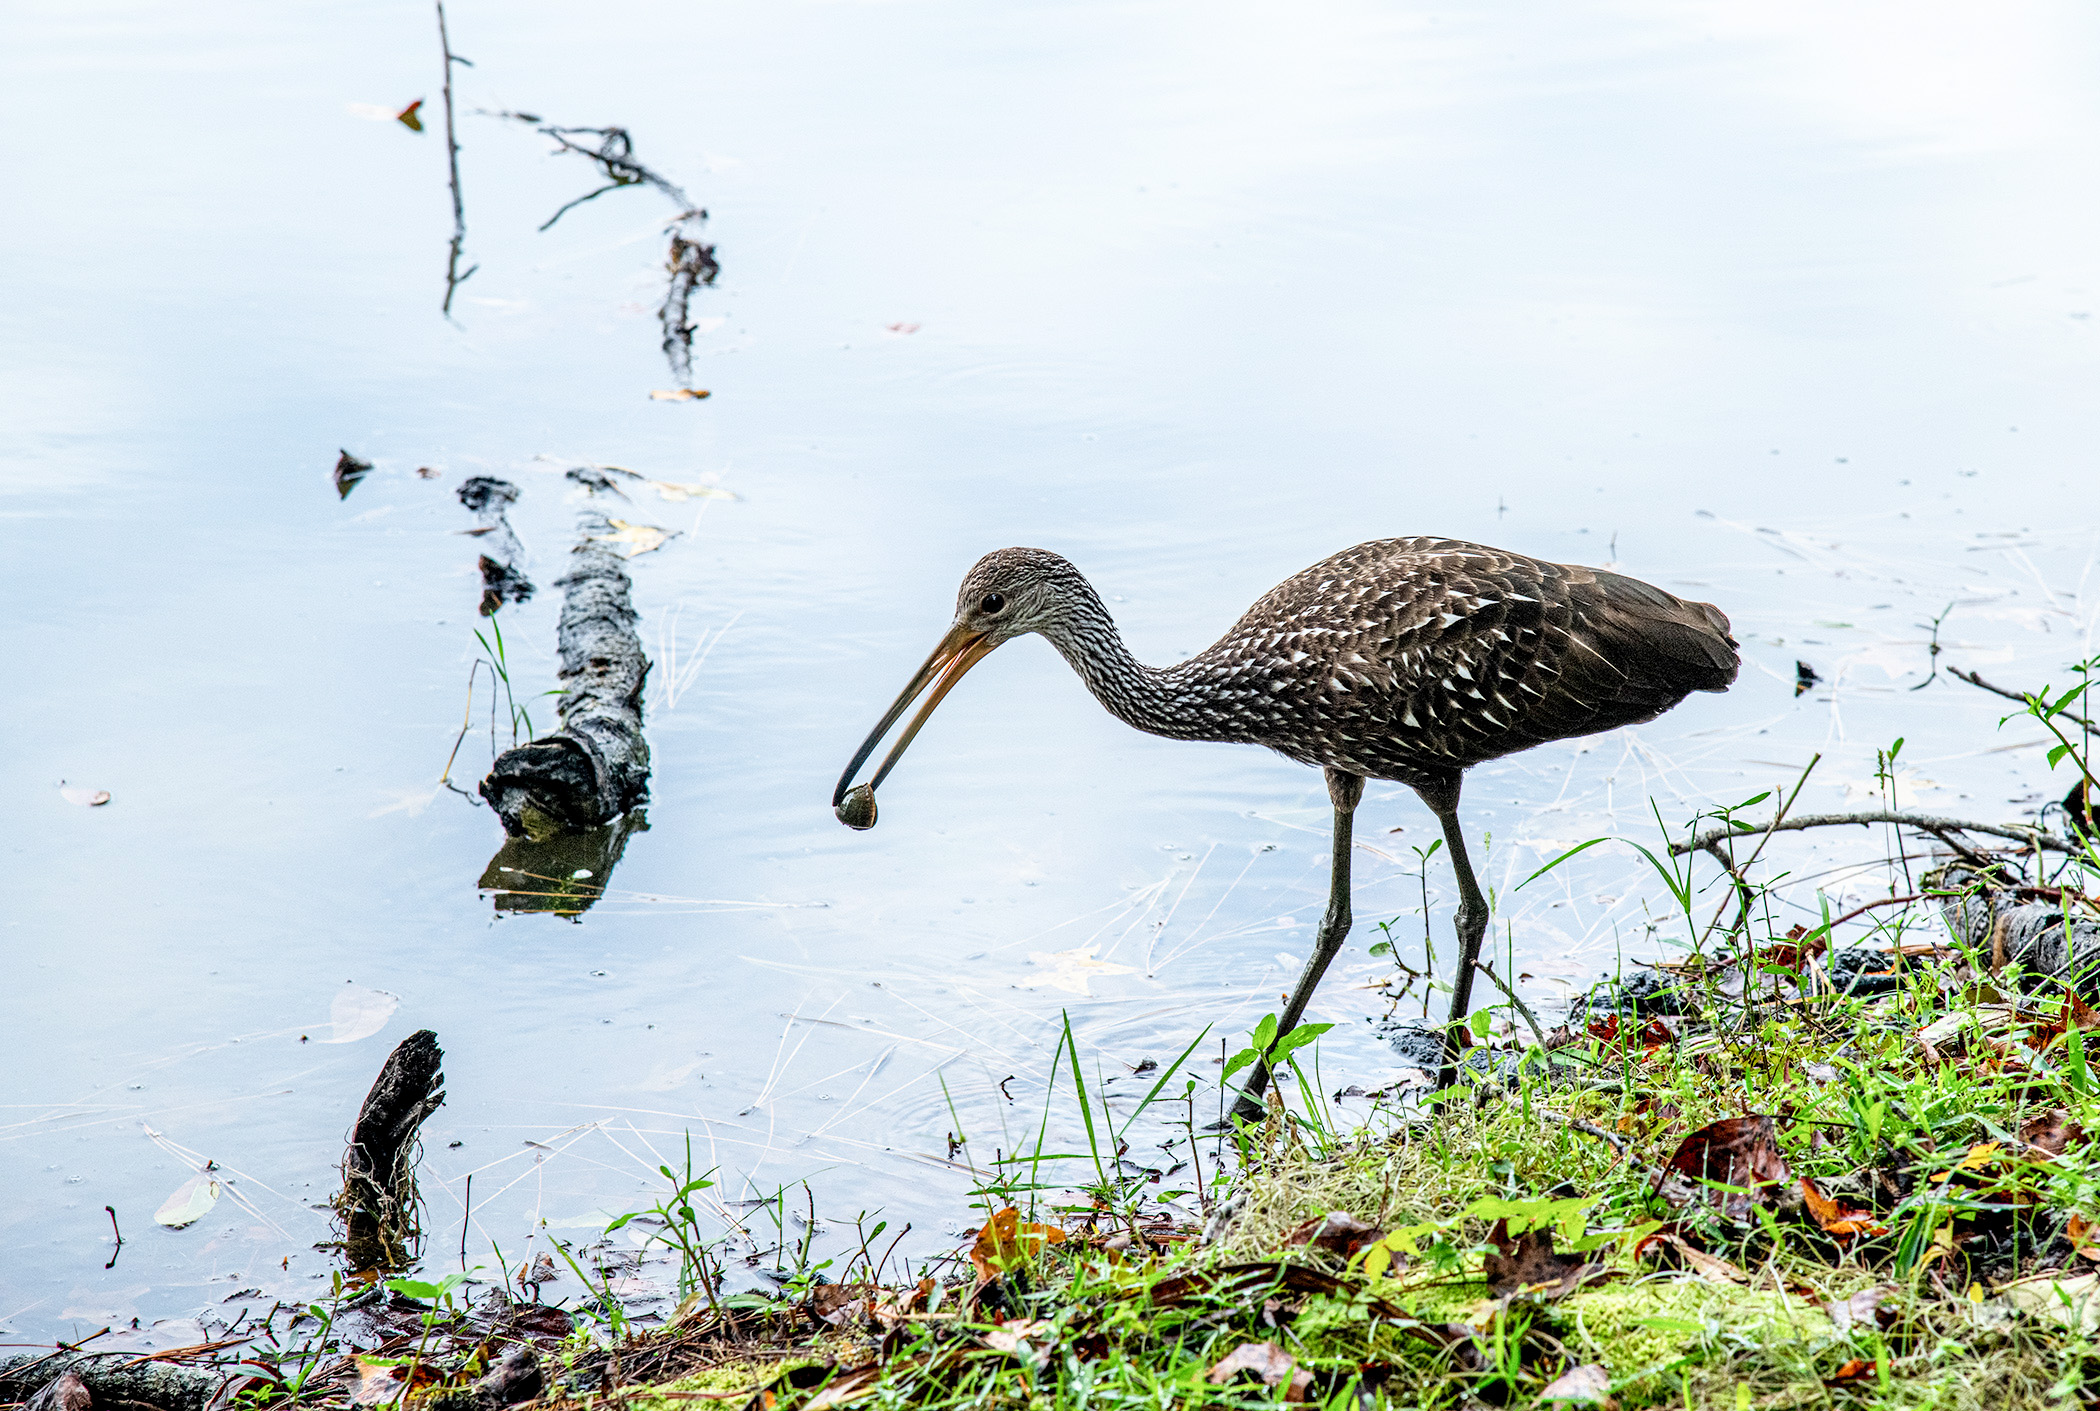 Ms.-Limpkin-and-Snail